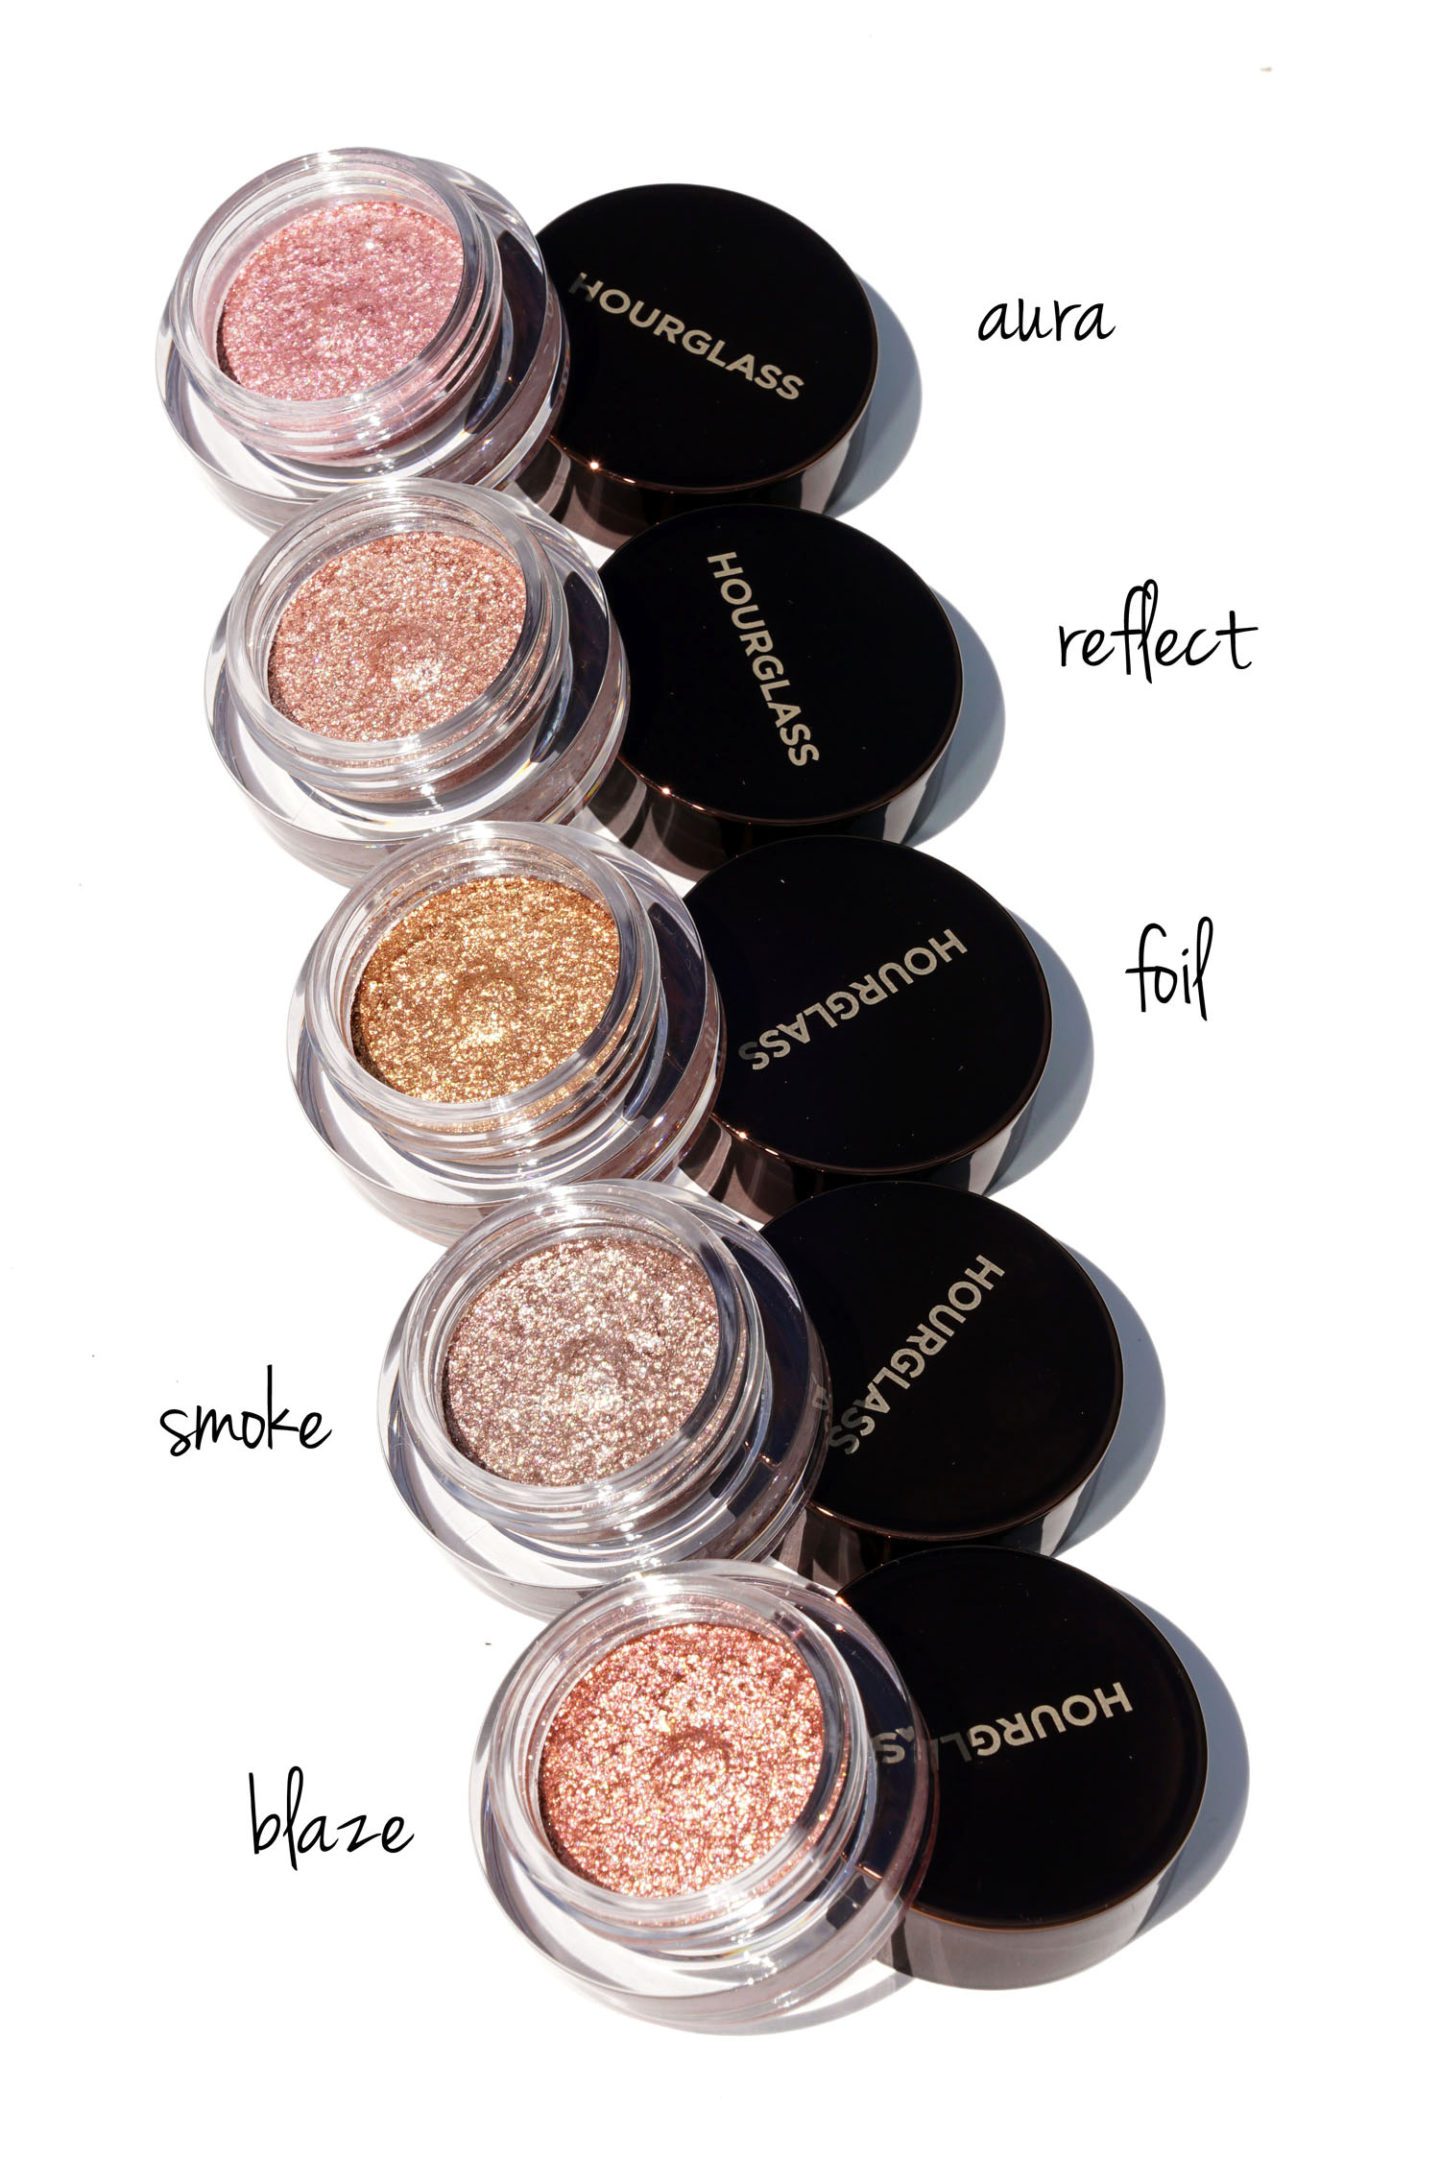 Hourglass Scattered Light Glitter Eyeshadow swatches | The Beauty Look Book